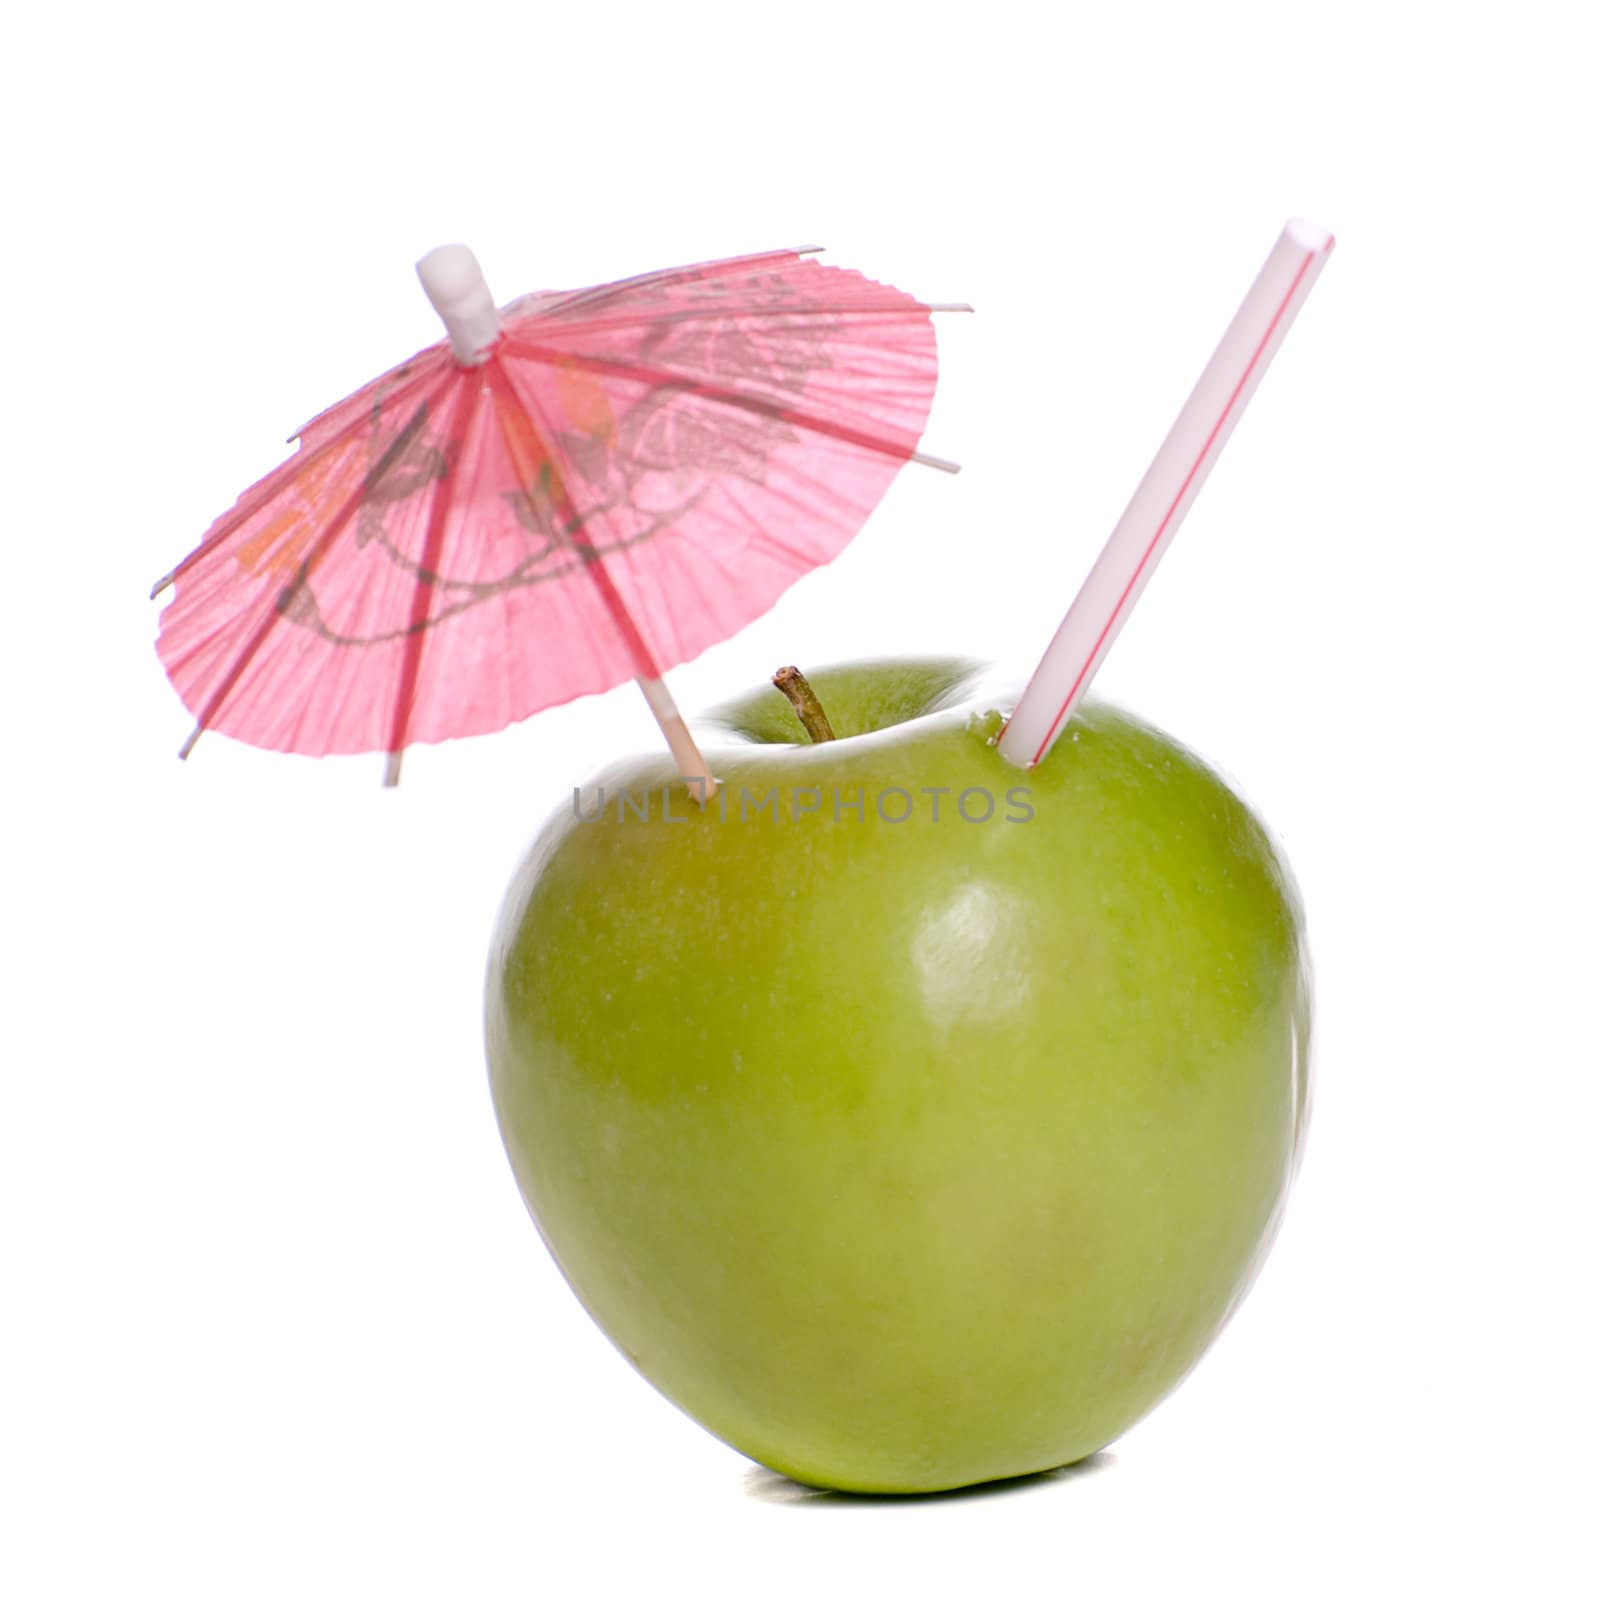 Concept image of fresh apple juice featuring an apple with a straw and an umbrella in it